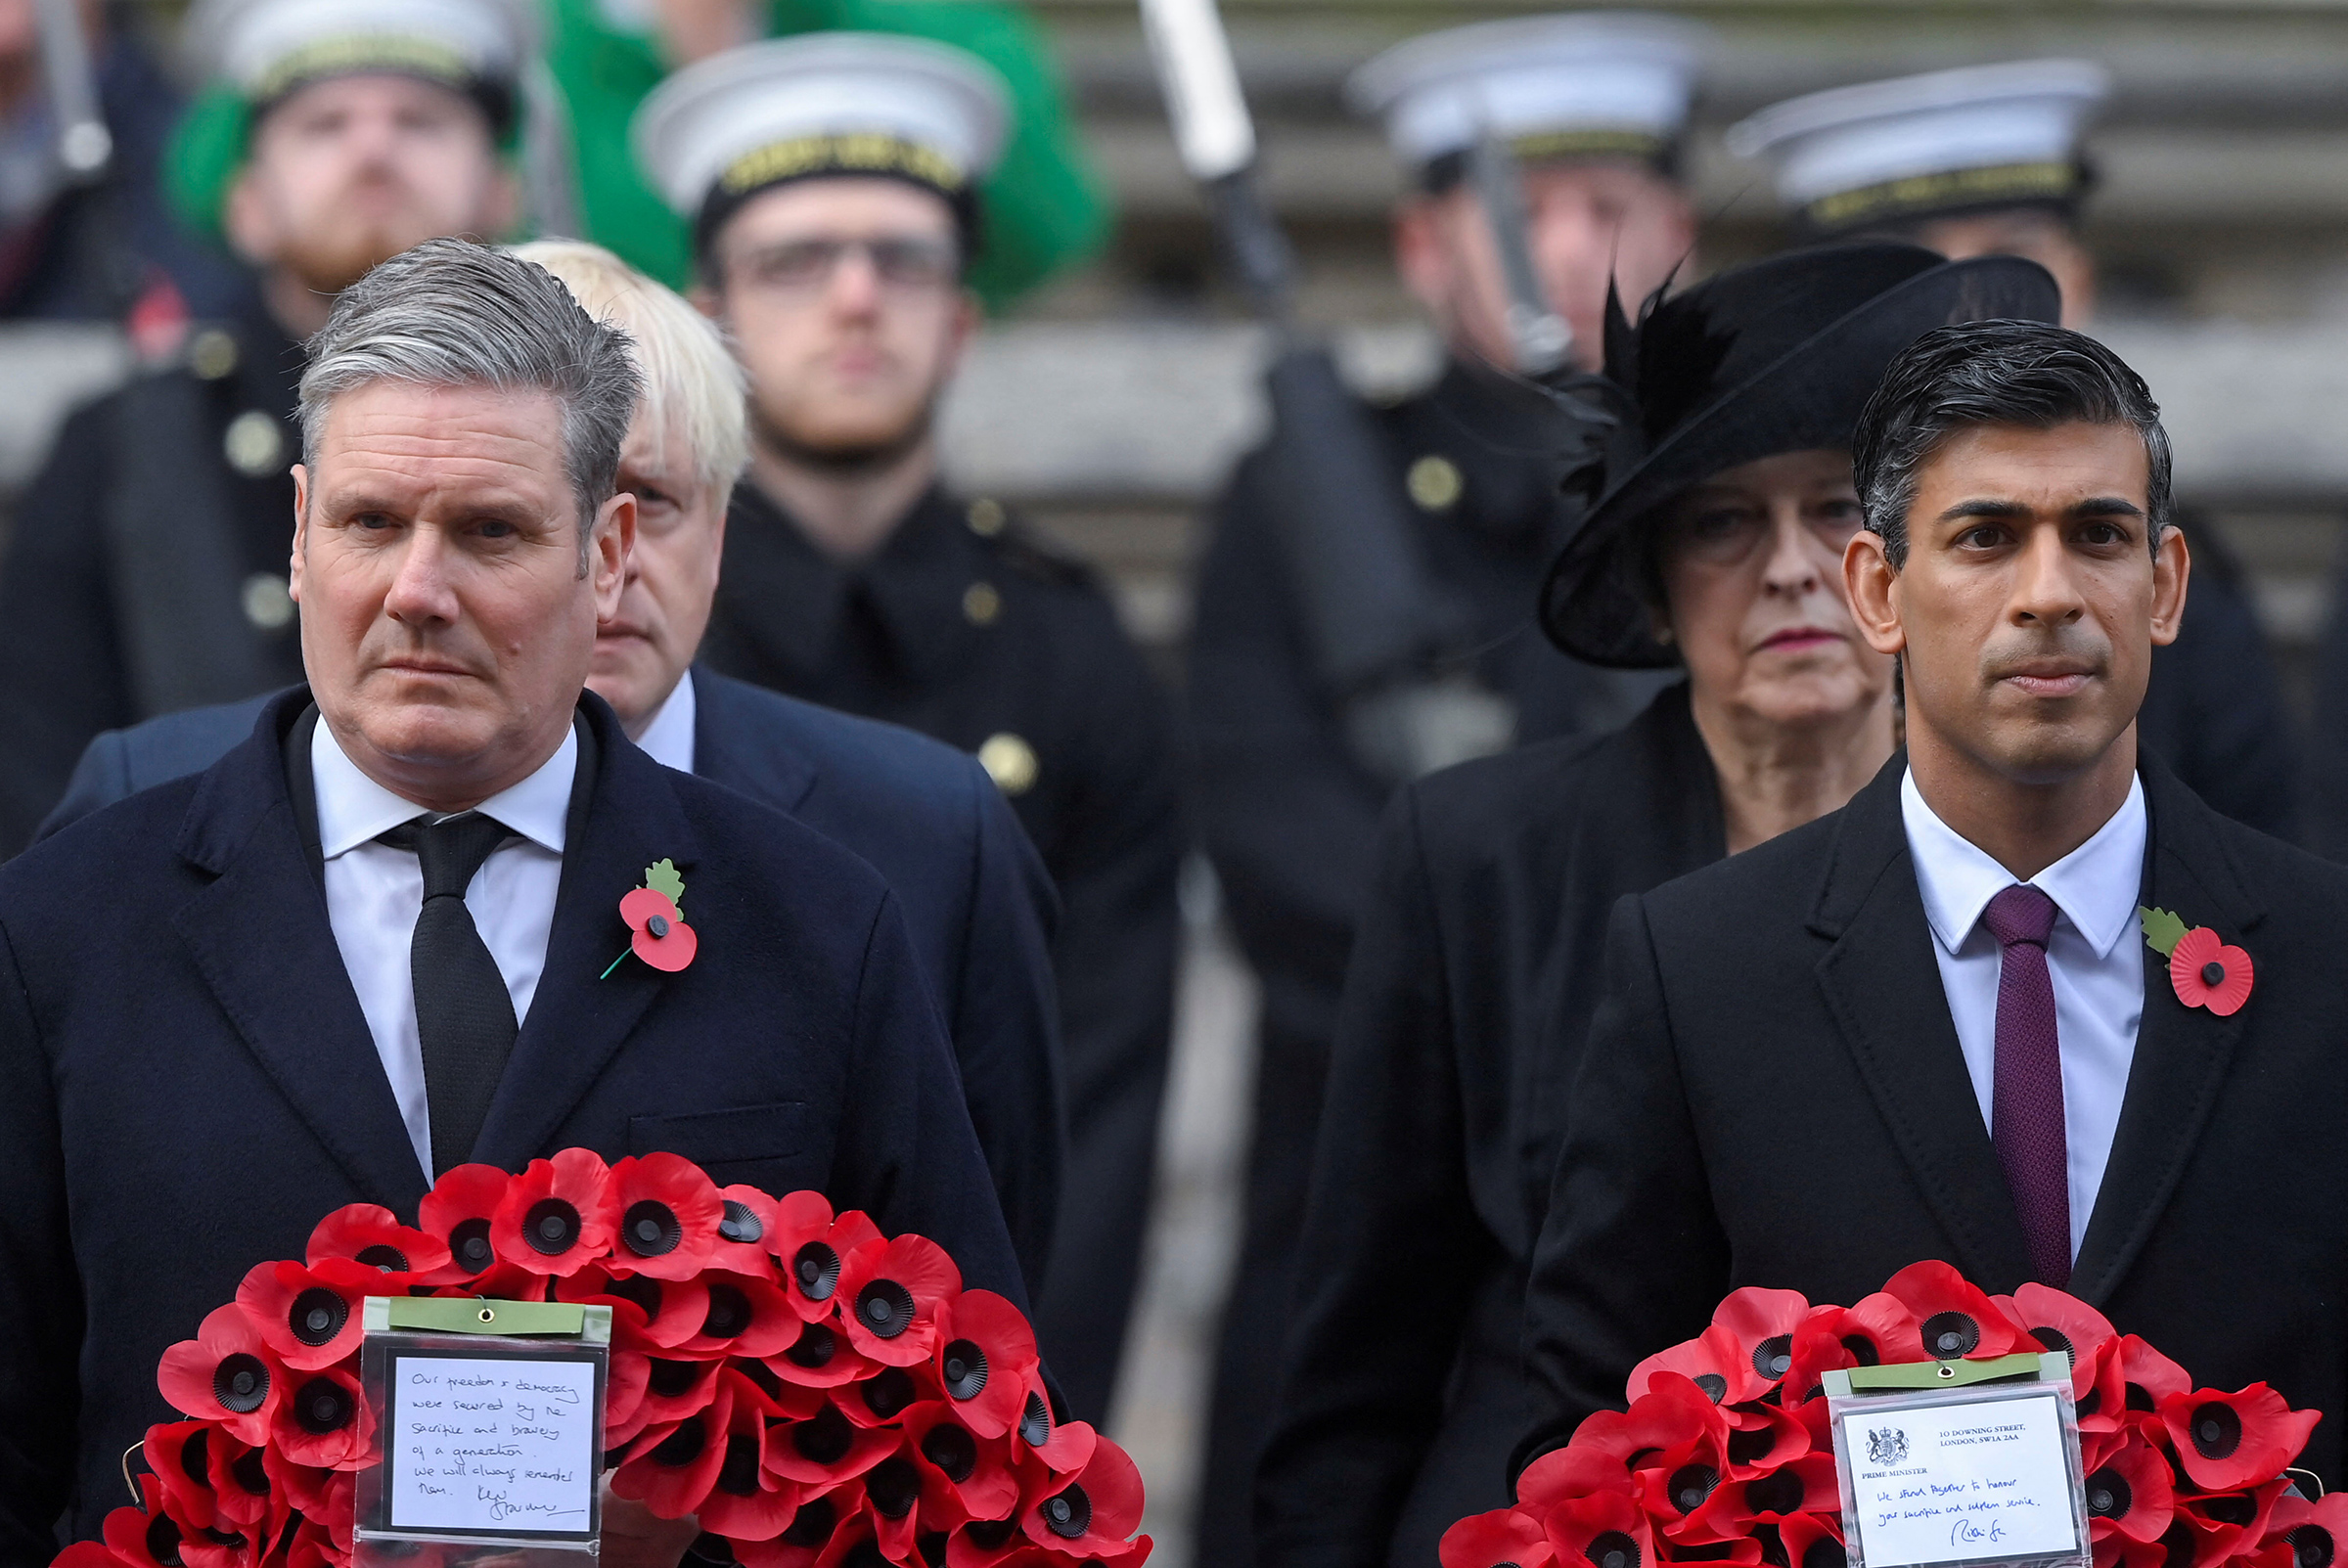 Starmer, British Prime Minister Rishi Sunak, former Prime Ministers Boris Johnson and Theresa May attend the Remembrance Sunday ceremon in London on Nov. 13, 2022. (Toby Melville—Pool/Reuters)